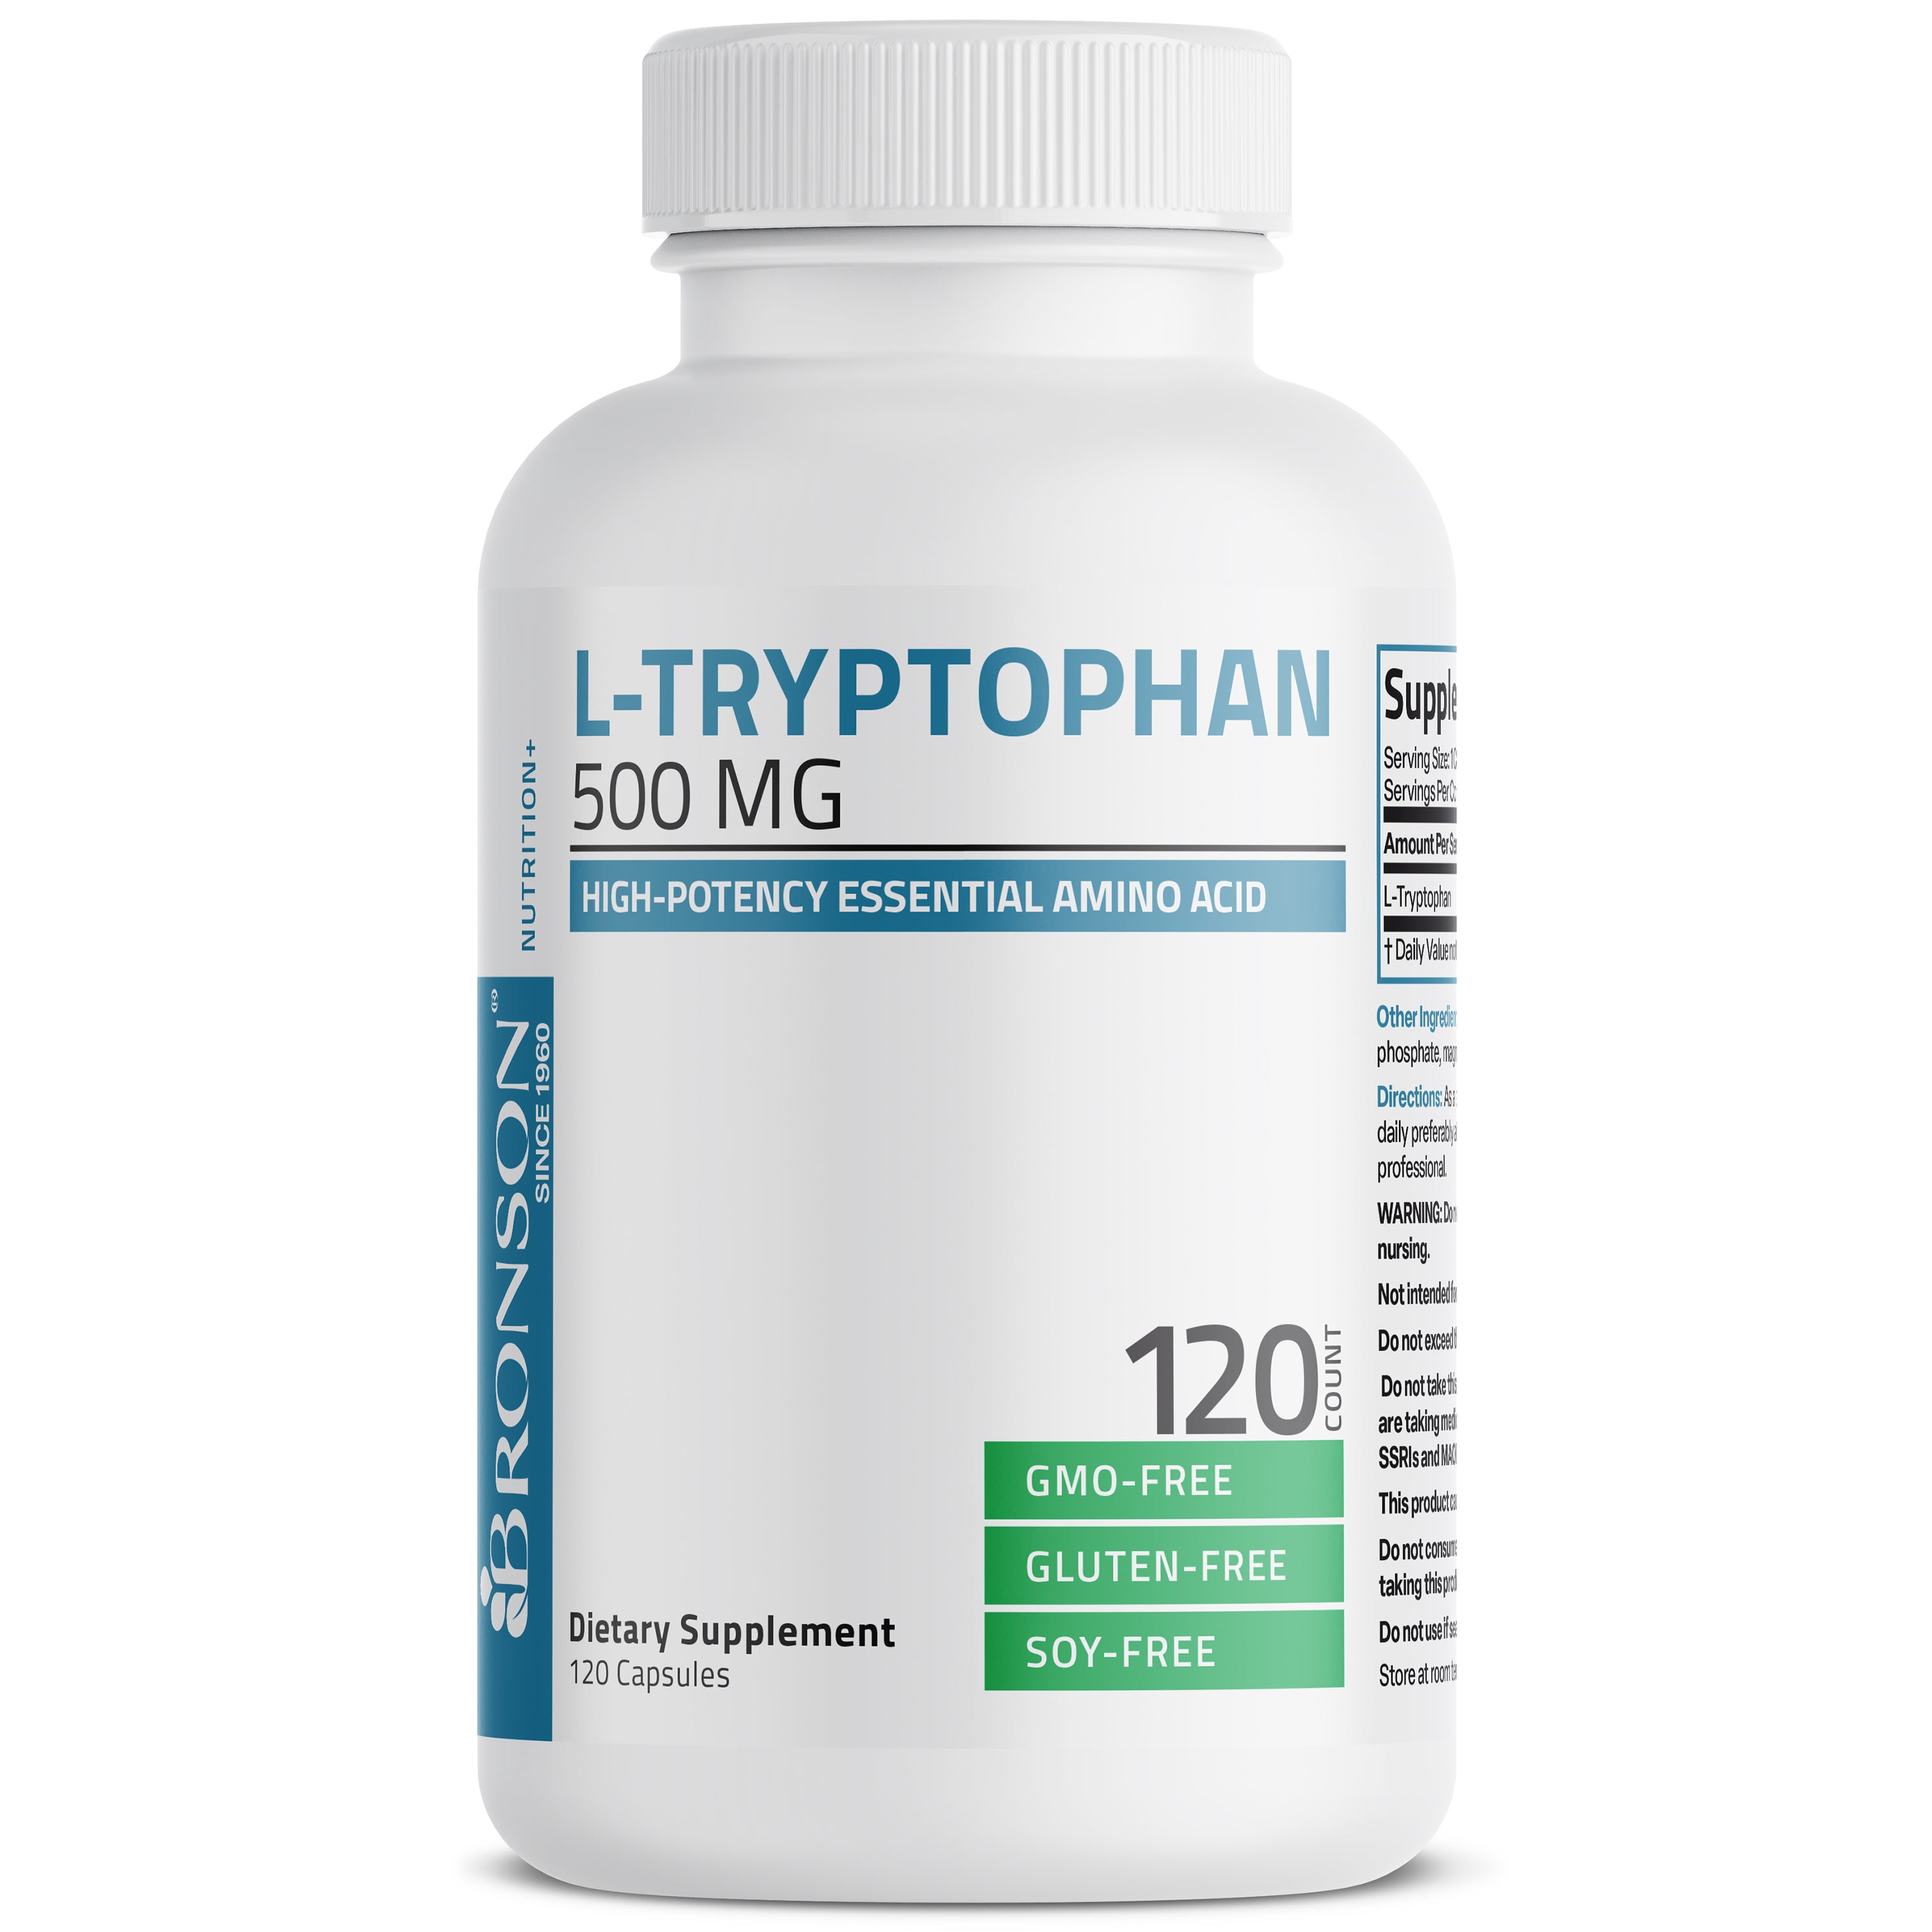 L-Tryptophan 500 MG view 5 of 8